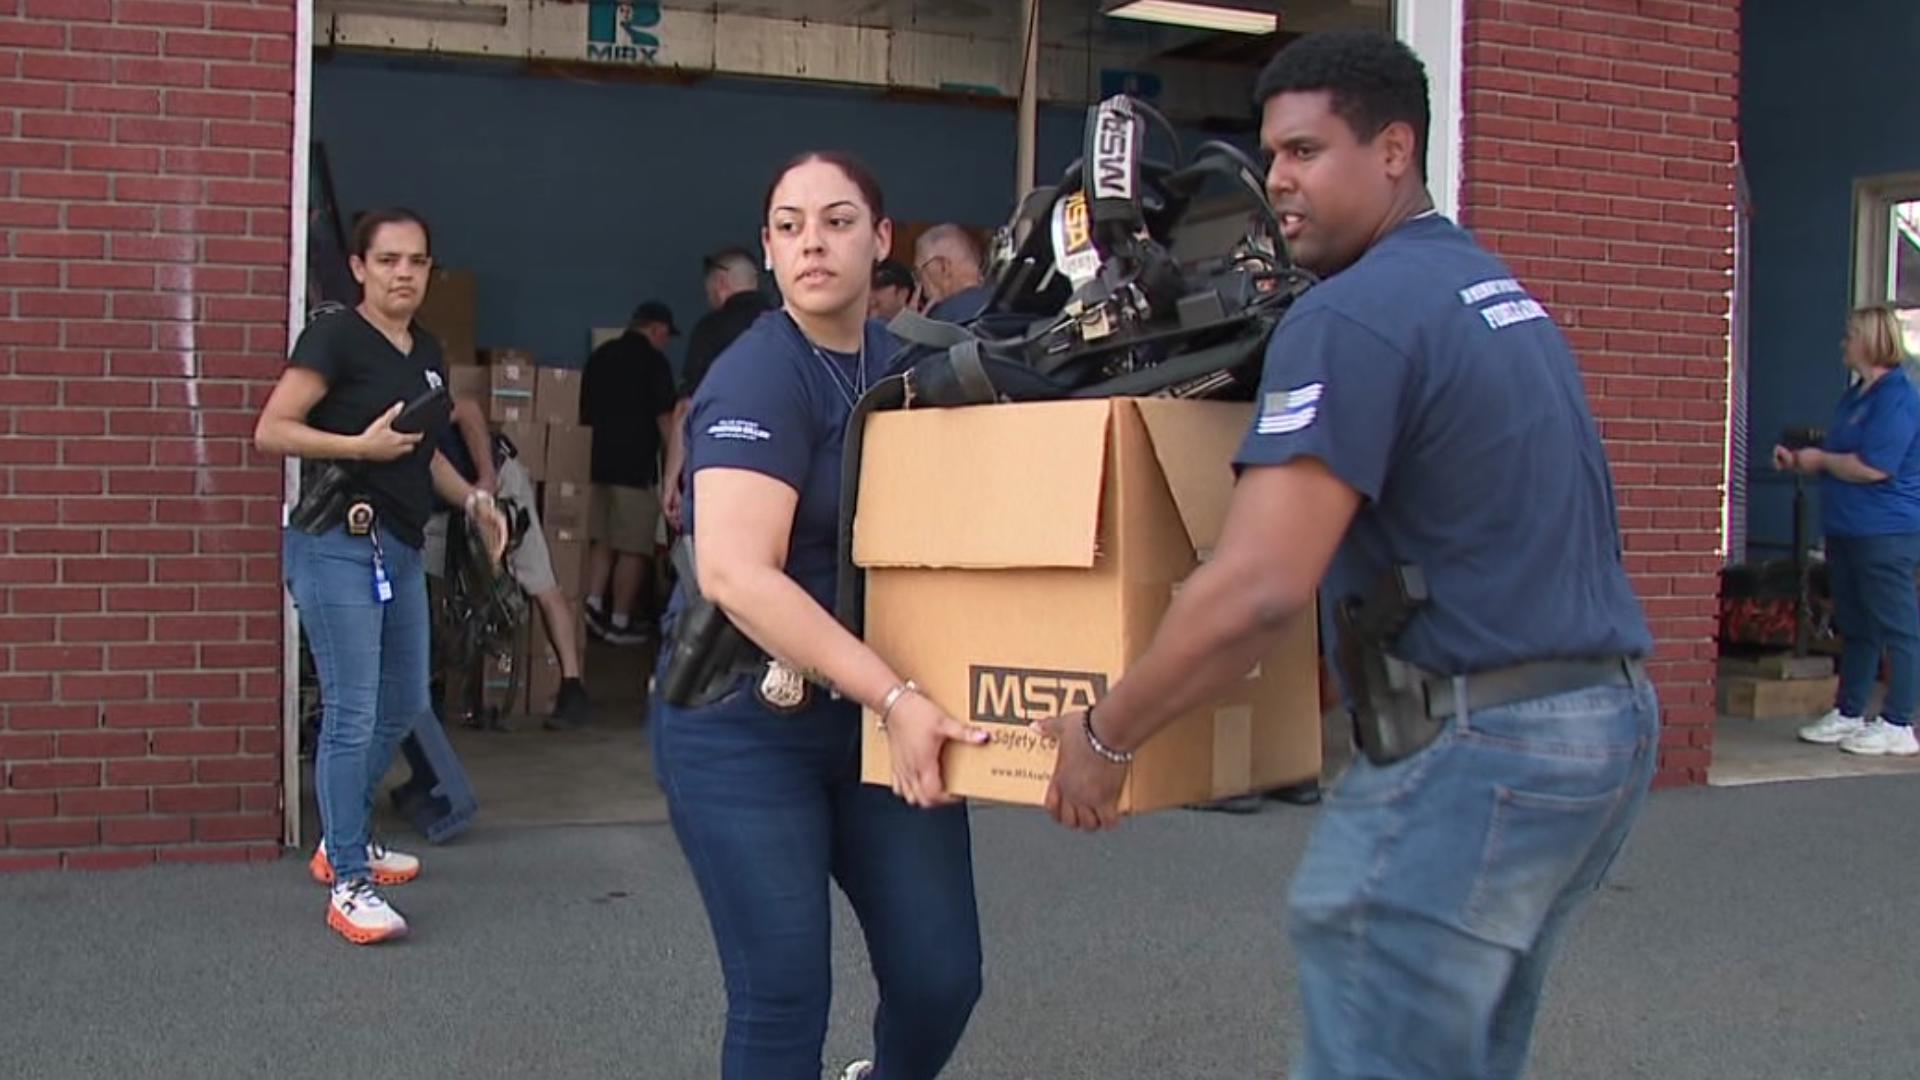 Extra gear from emergency crews in our area is being shipped out to help first responders in the Dominican Republic.